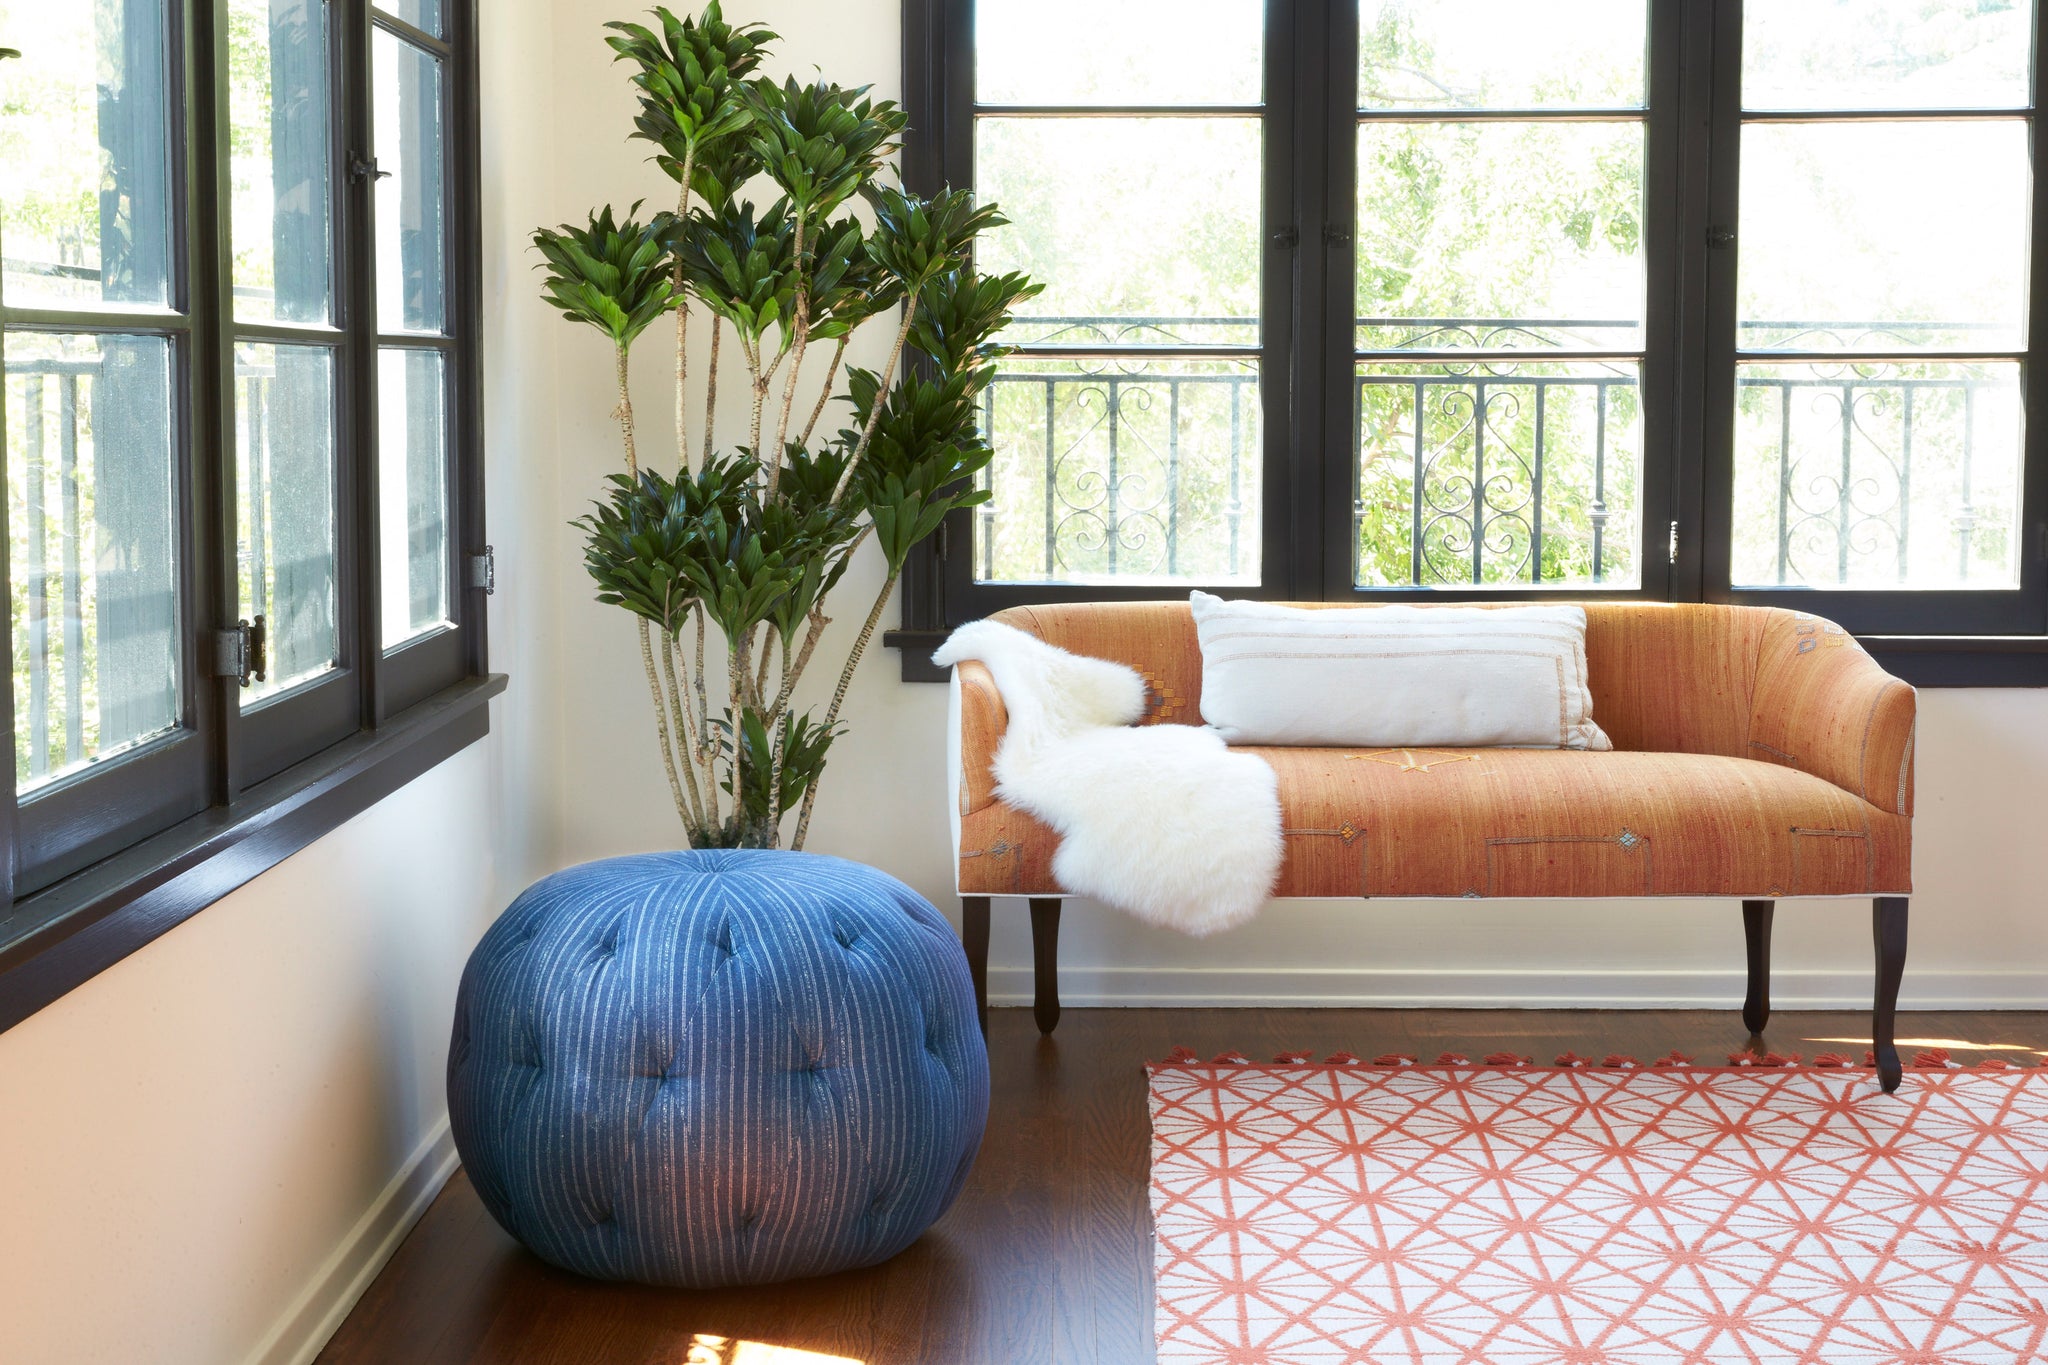  Pouf Ottoman 26 in Bengal Pin Stripe Indigo next to a tan sofa and potted plant. Photographed in Bengal Pin STripe Indigo. 